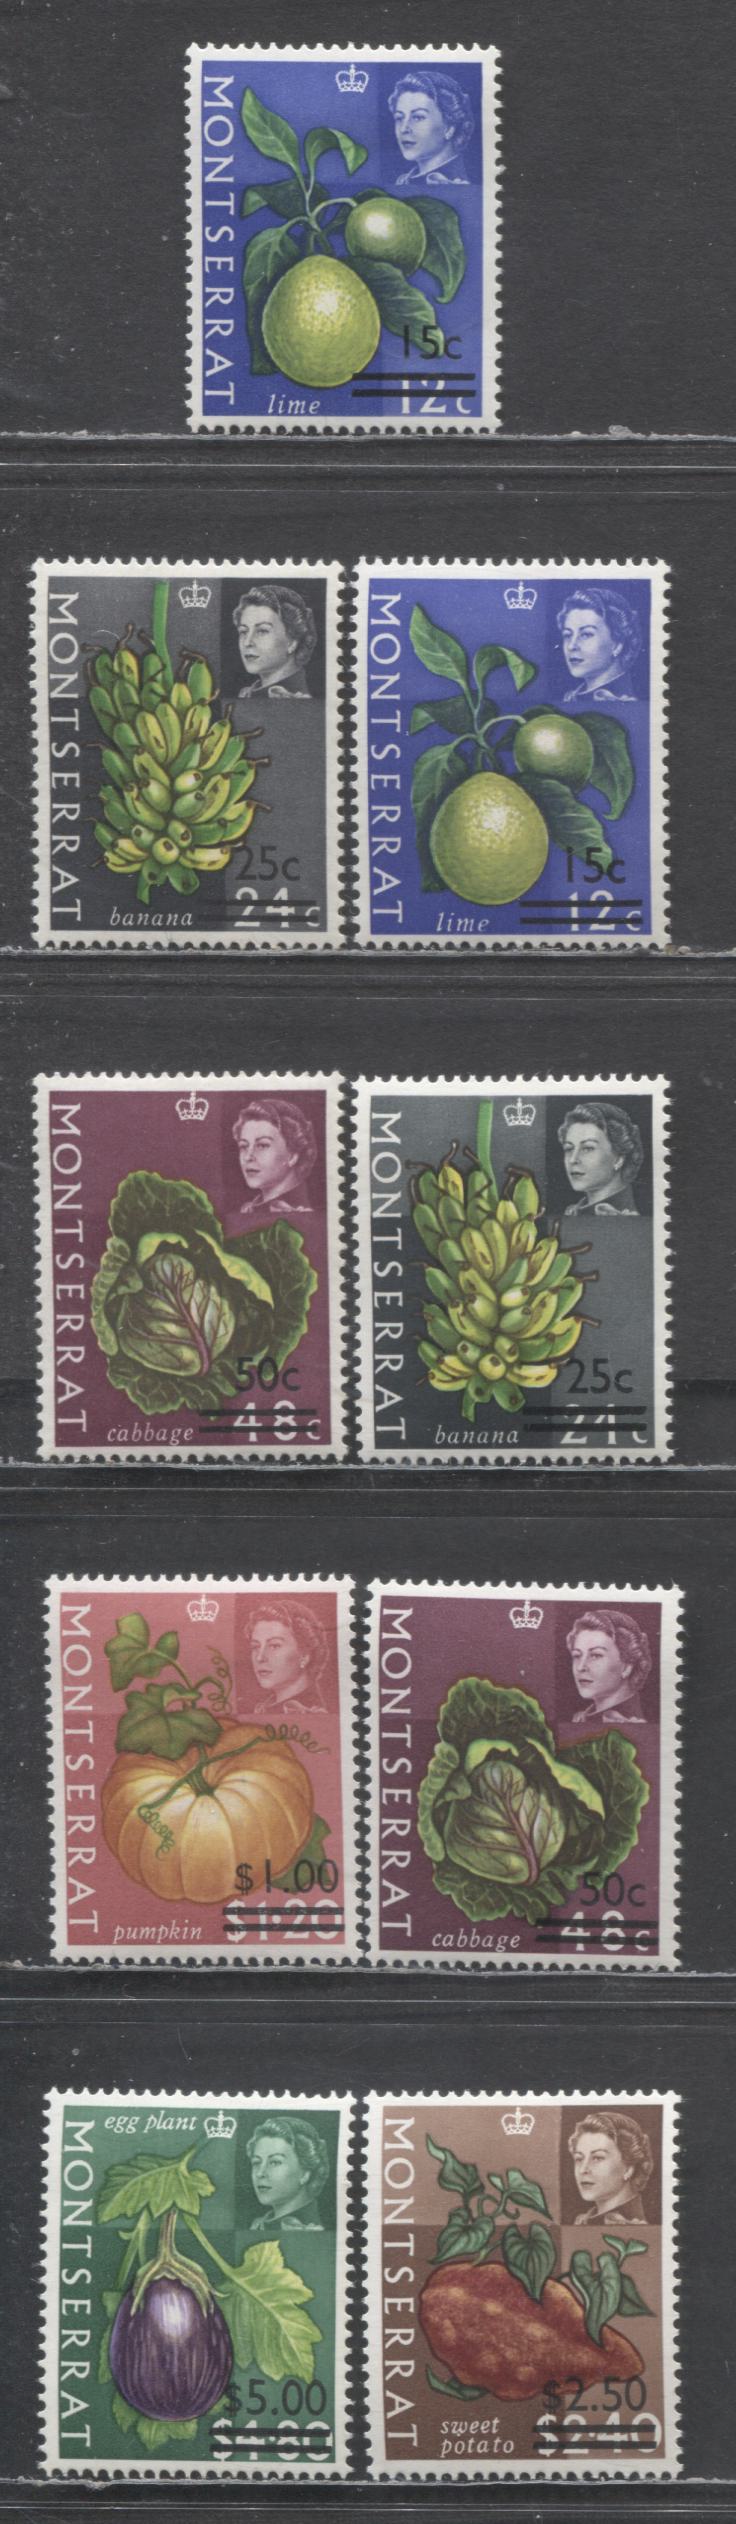 Lot 7 Montserrat SC#193-198 1968 Definitive Surcharges, Block CA Wmk Upright & Sideways, 9 VFOG Singles, Click on Listing to See ALL Pictures, Estimated Value $8